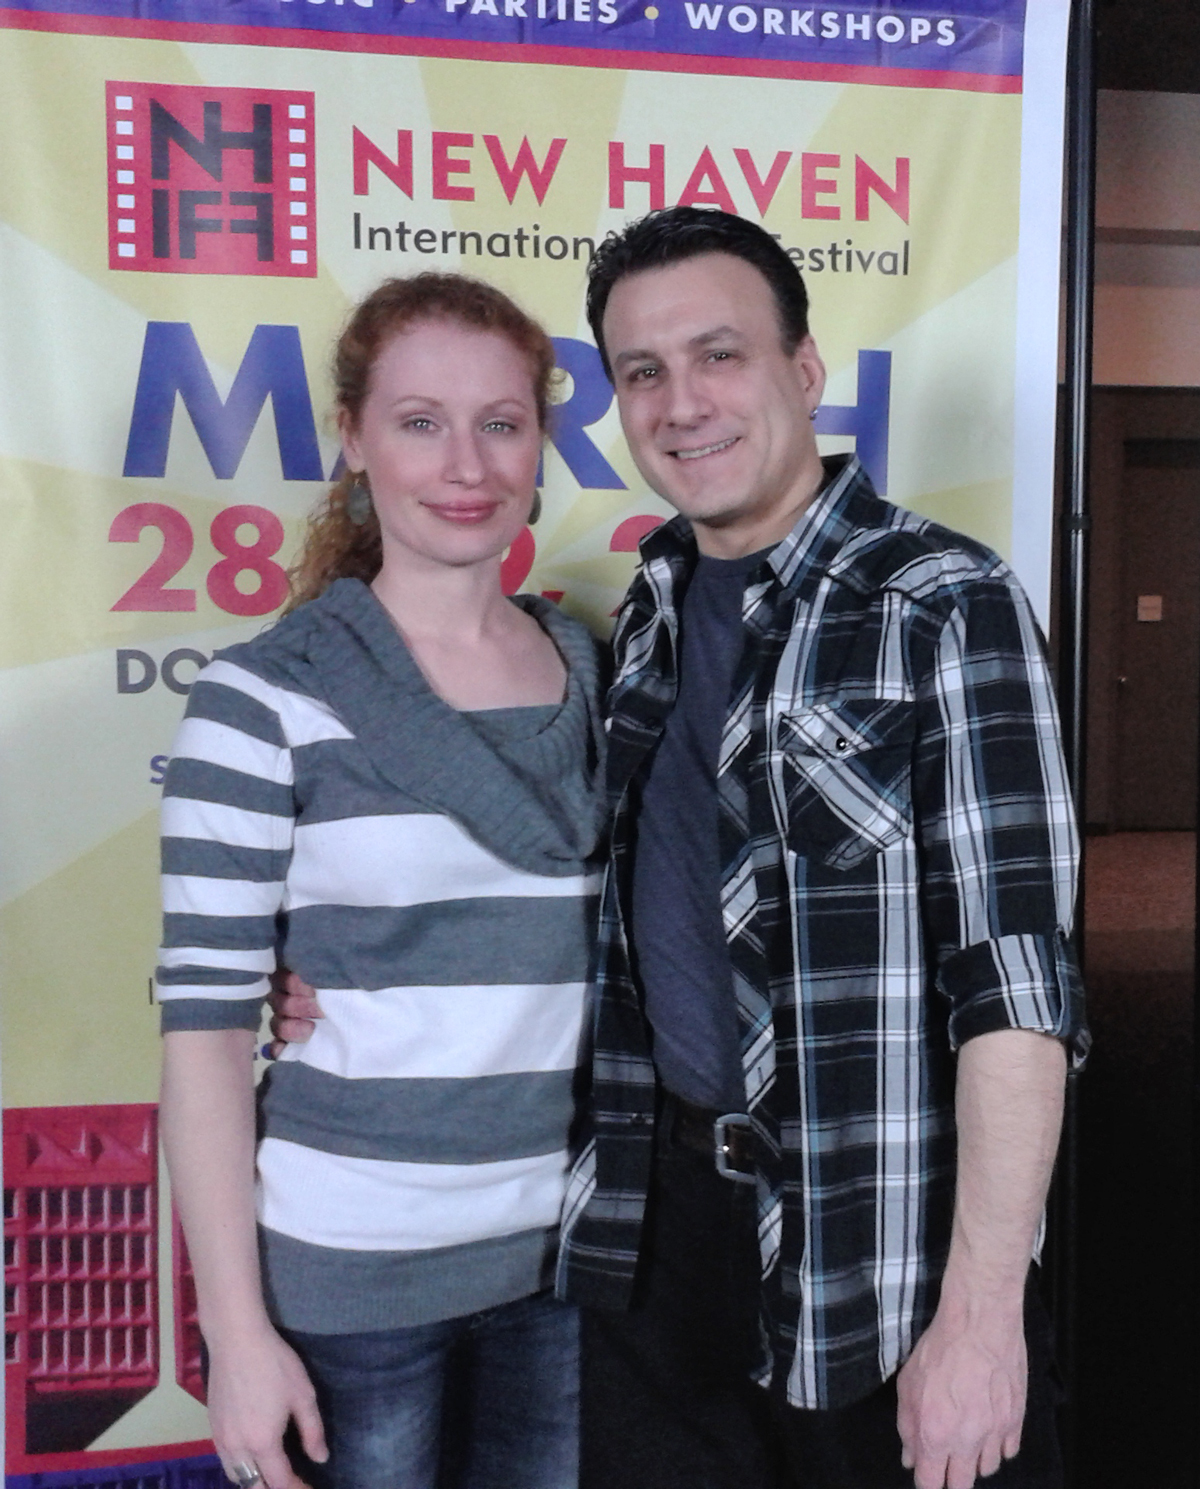 At the New Haven International Film Festival 2014.